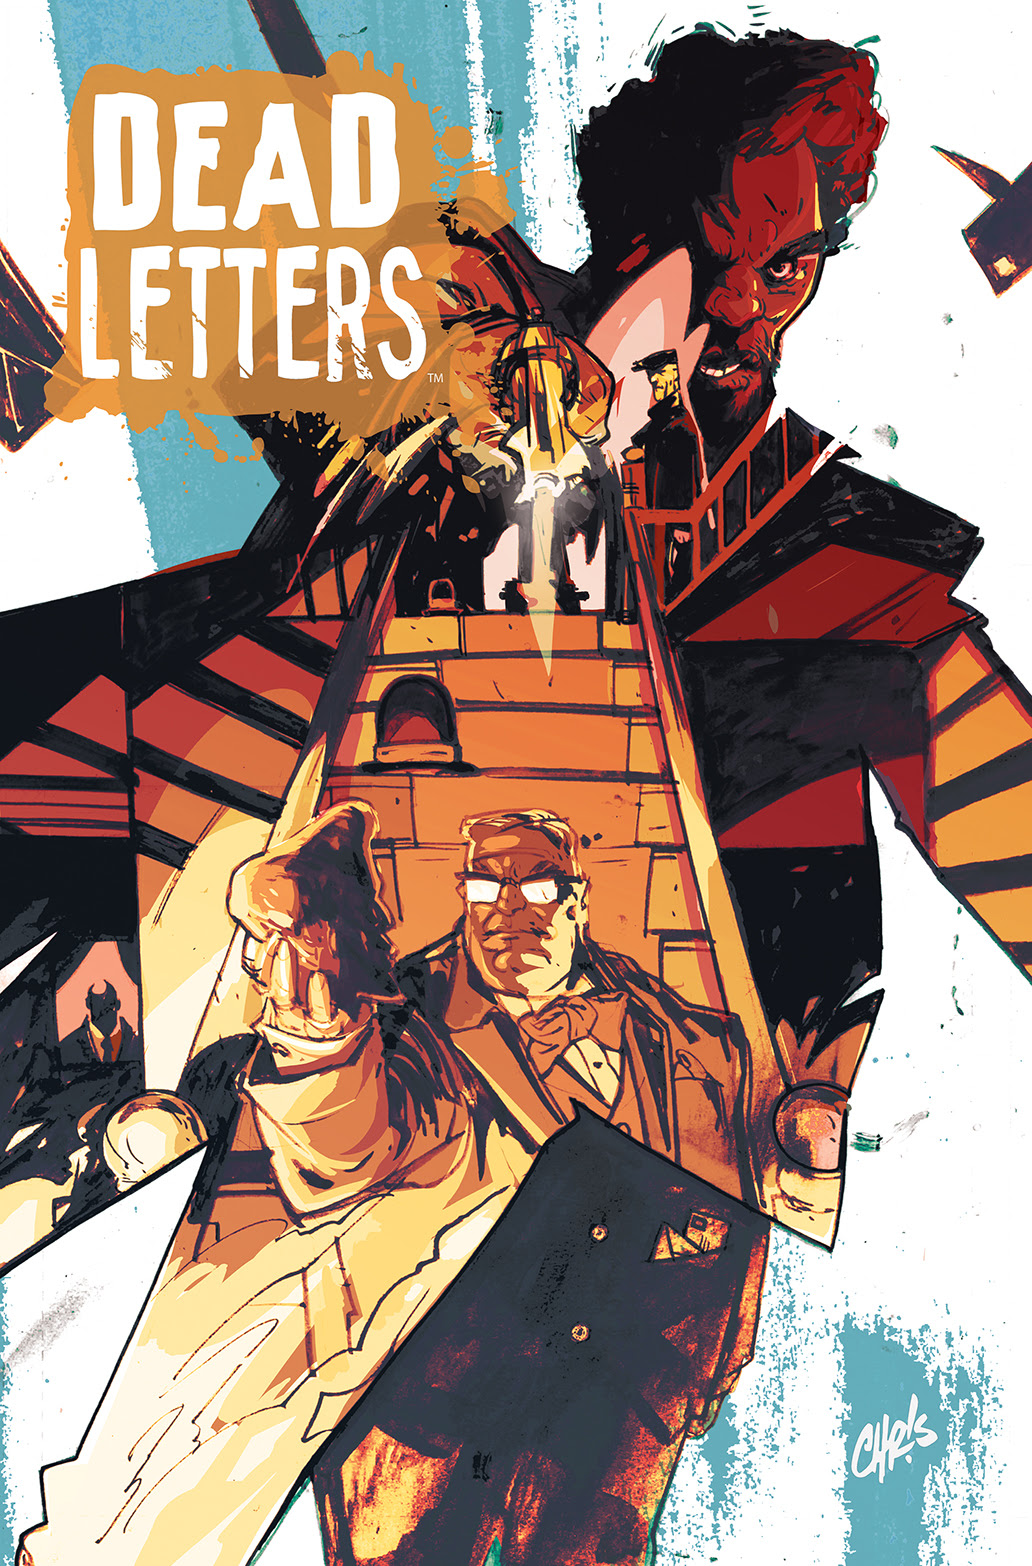 DEAD LETTERS #2 Cover A by Chris Visions